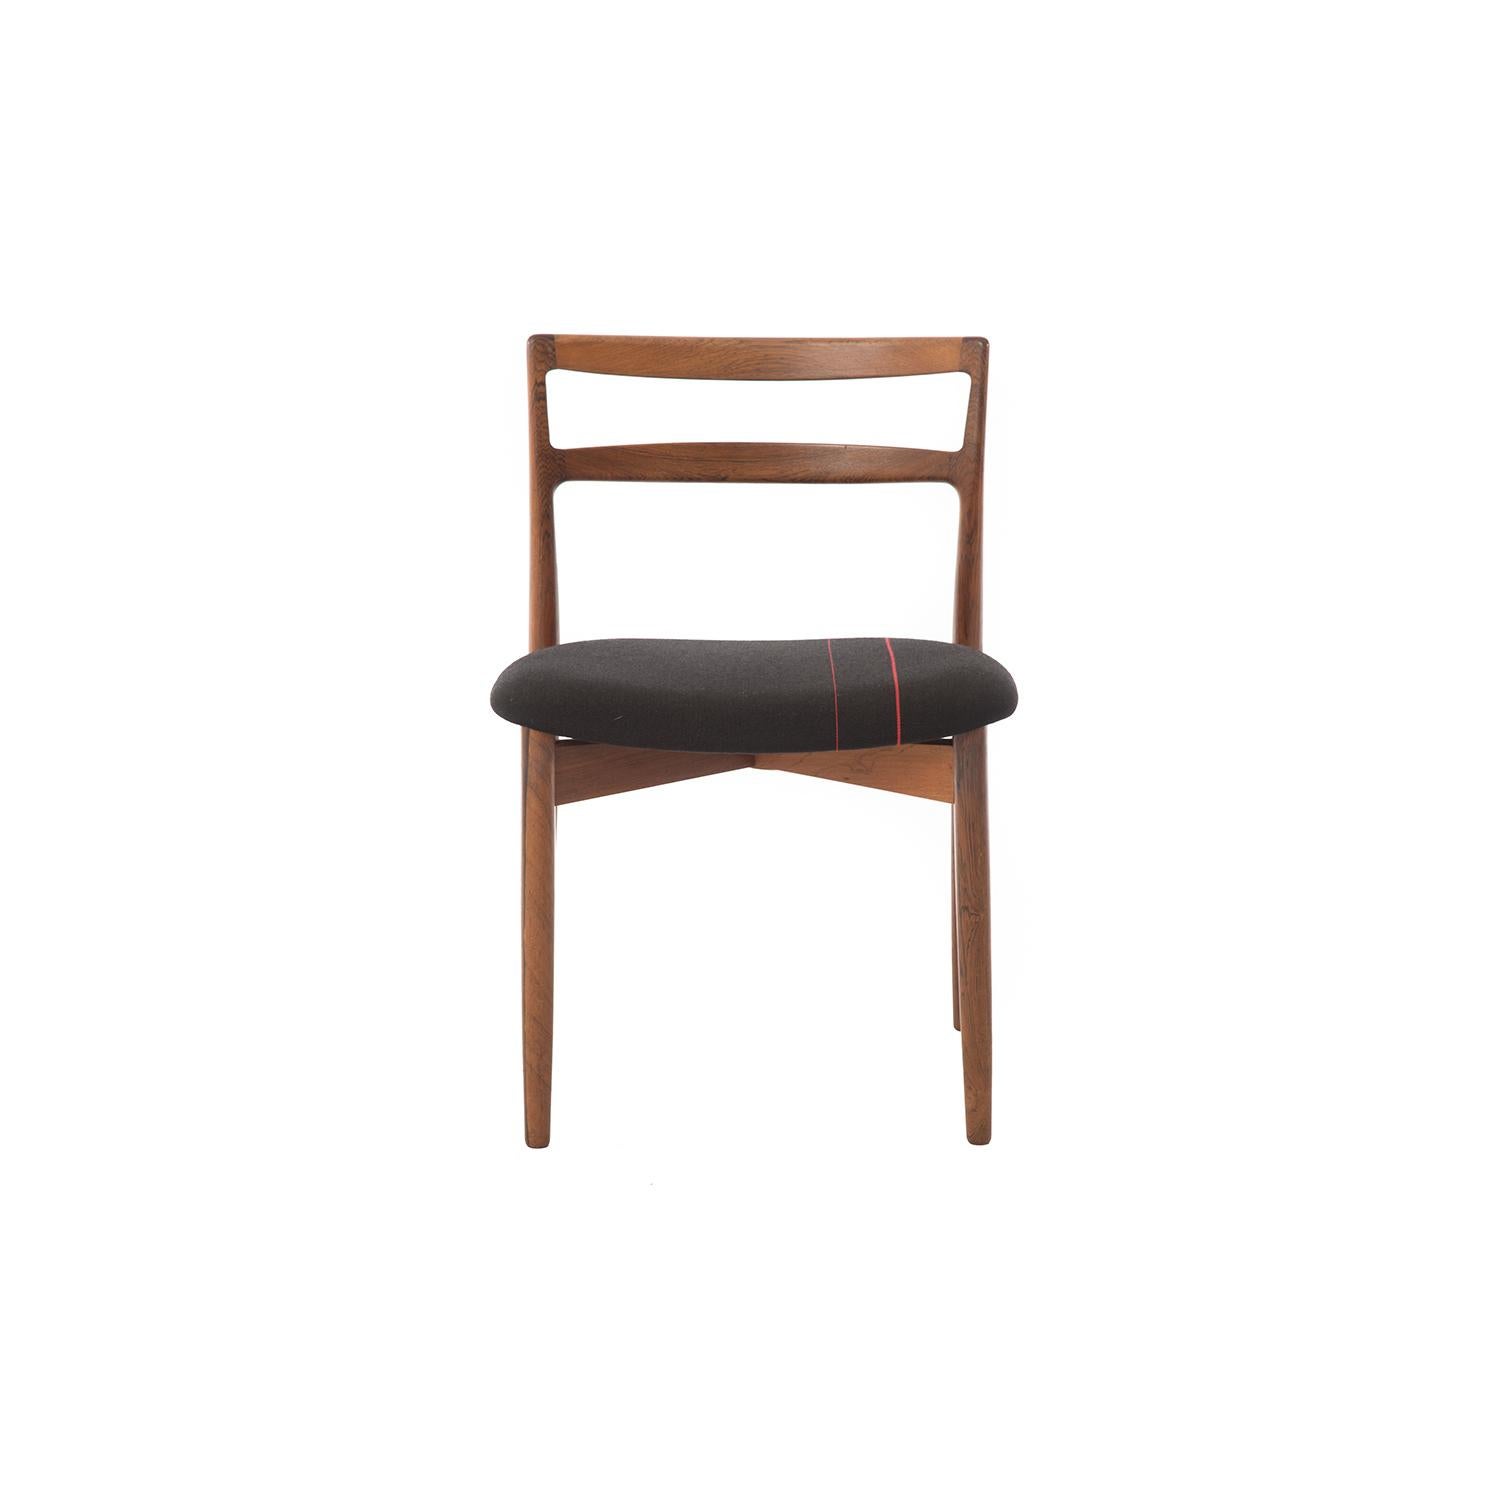 This set of 6 Harry Østergaard rosewood dining chairs feature a sleek ladder back design, which is offset by a wider and more plush seat, upholstered in mercerized wool, with slight racing stripes.